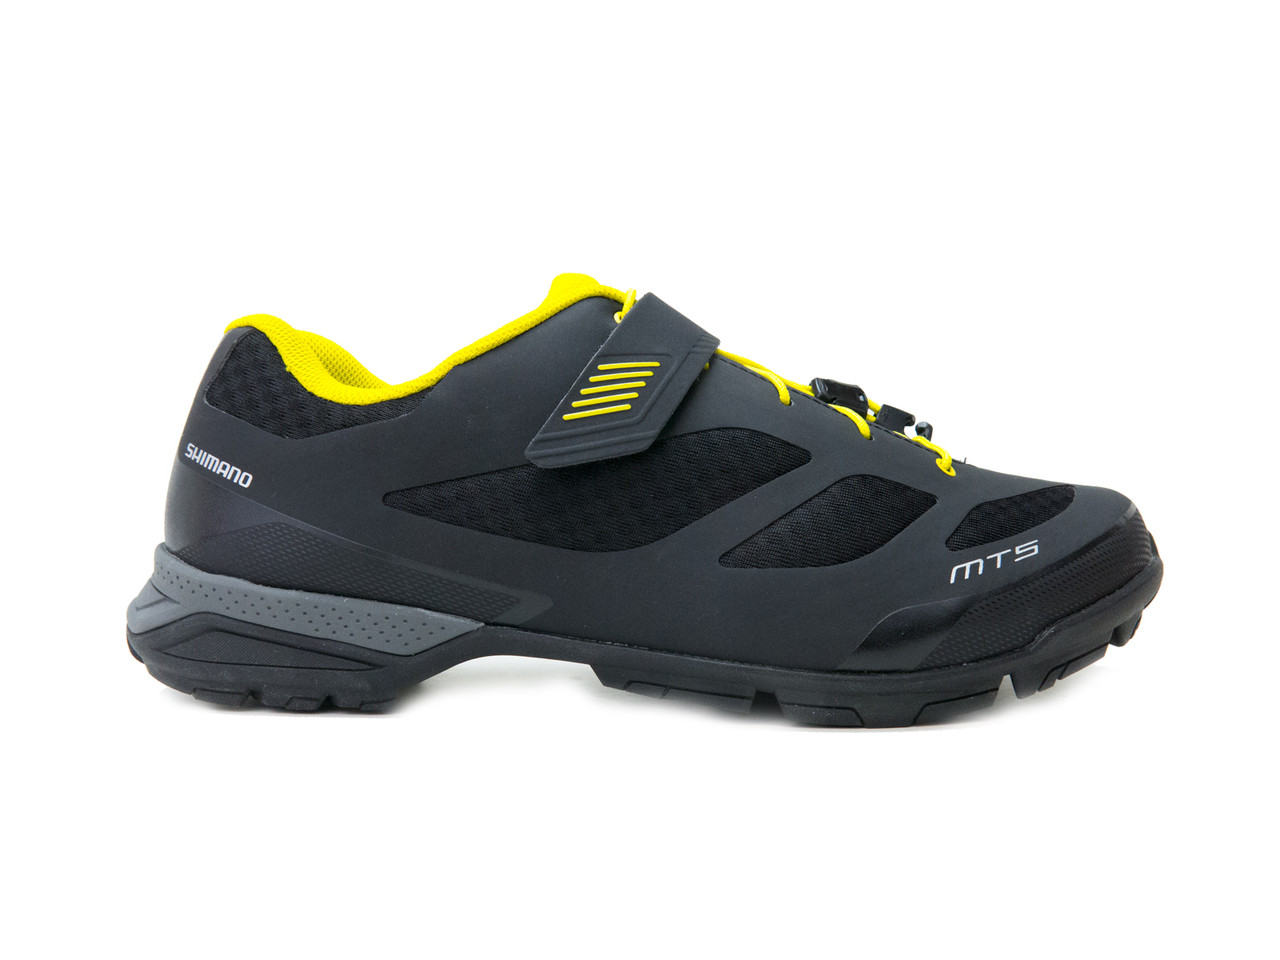 shimano mt3 spd touring shoes review